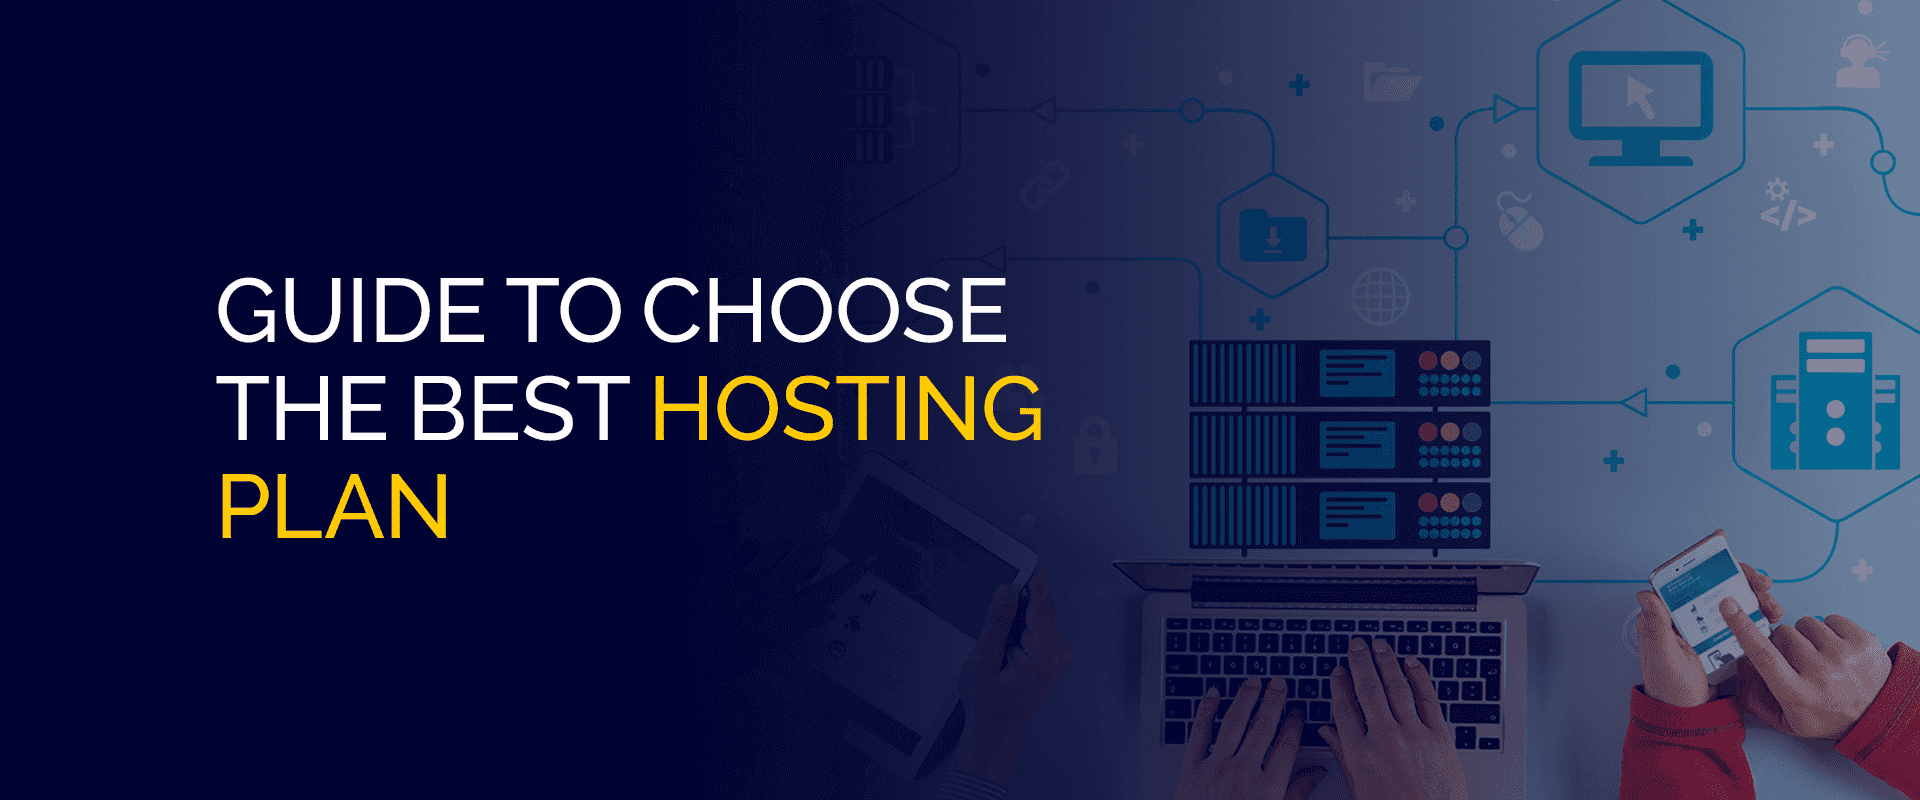 Guide to Choose the Best Hosting Plan